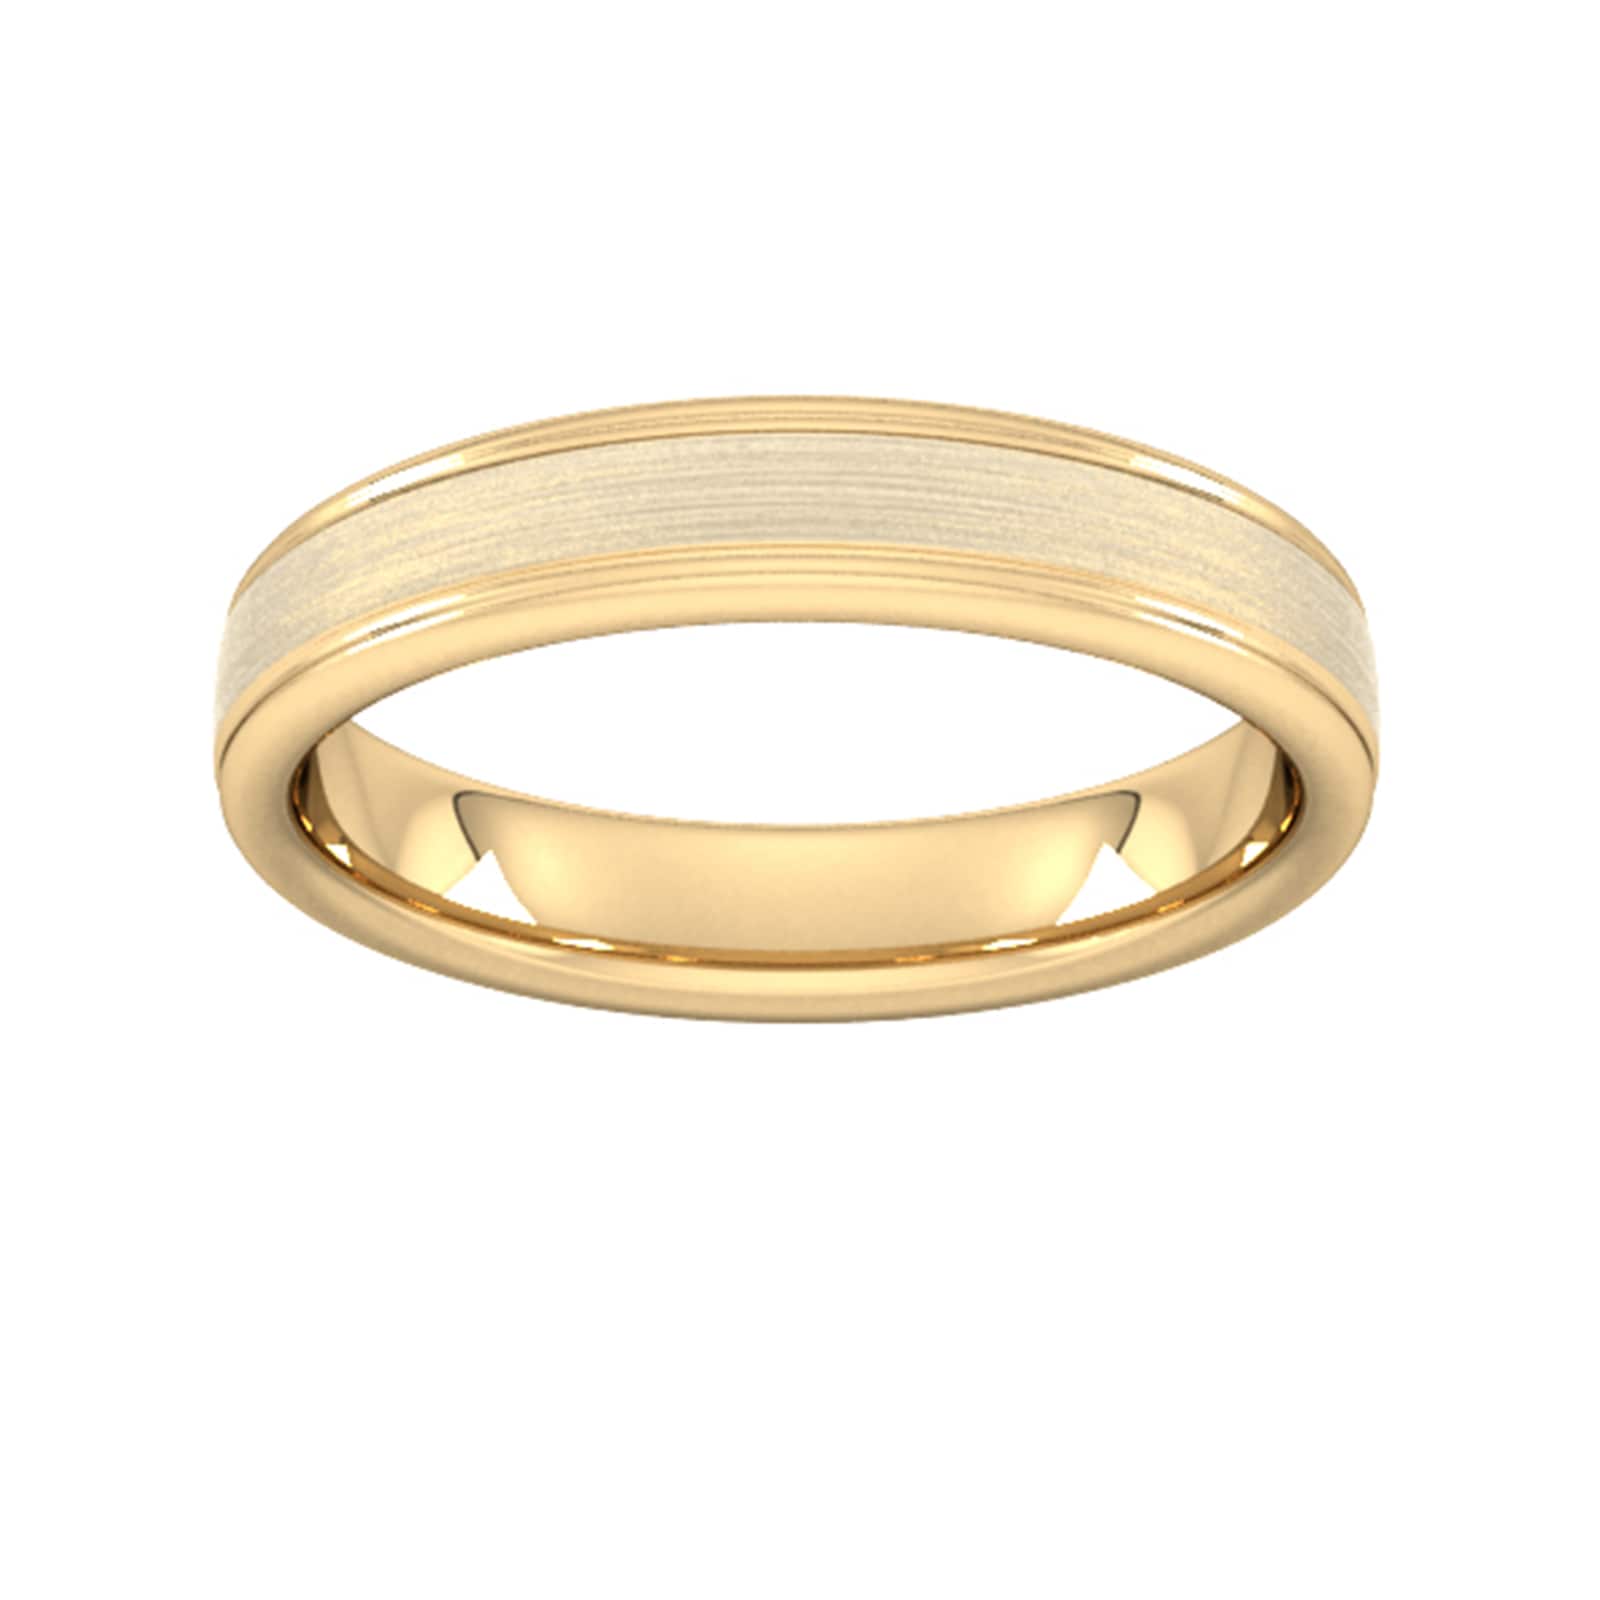 4mm Slight Court Standard Matt Centre With Grooves Wedding Ring In 18 Carat Yellow Gold - Ring Size N